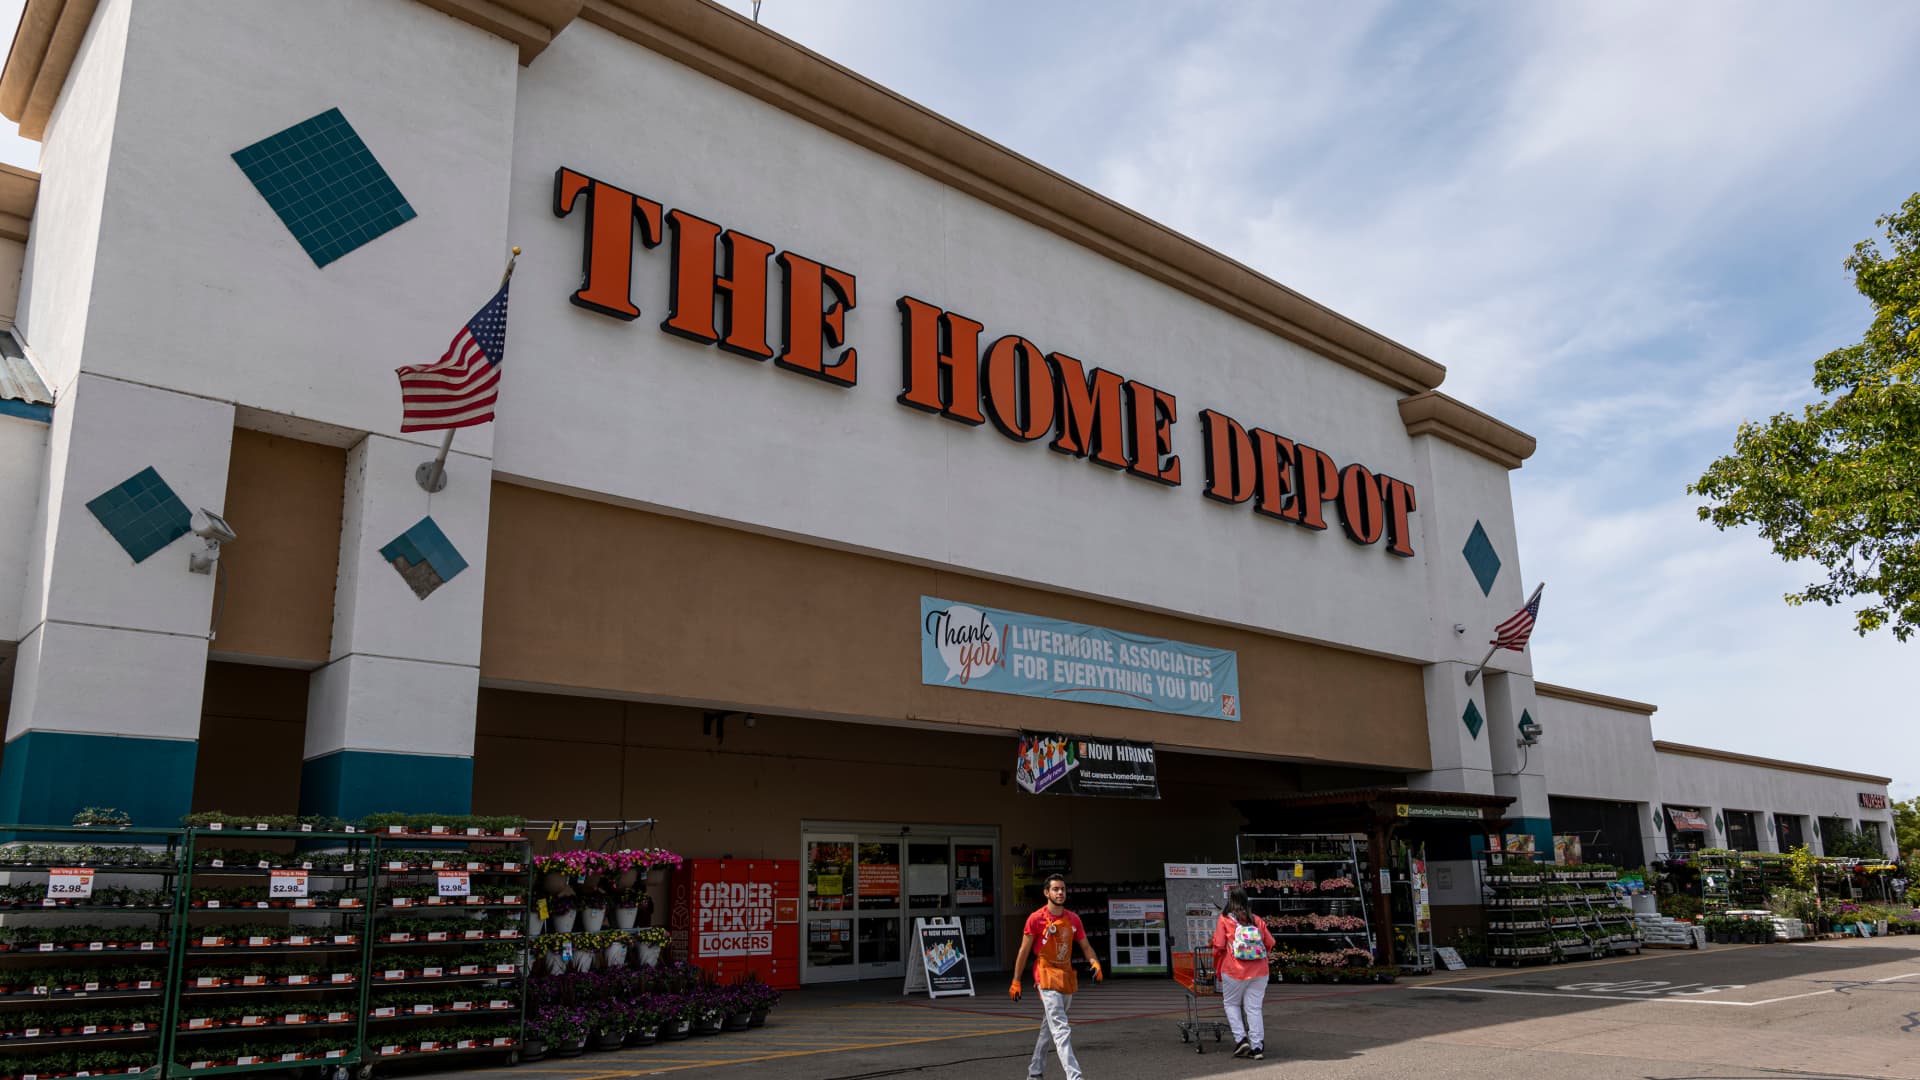 A Home Depot store in Livermore, California, US, on Thursday, May 12, 2022. Home Depot Inc. is scheduled to release earnings figures on May 17. Photographer: